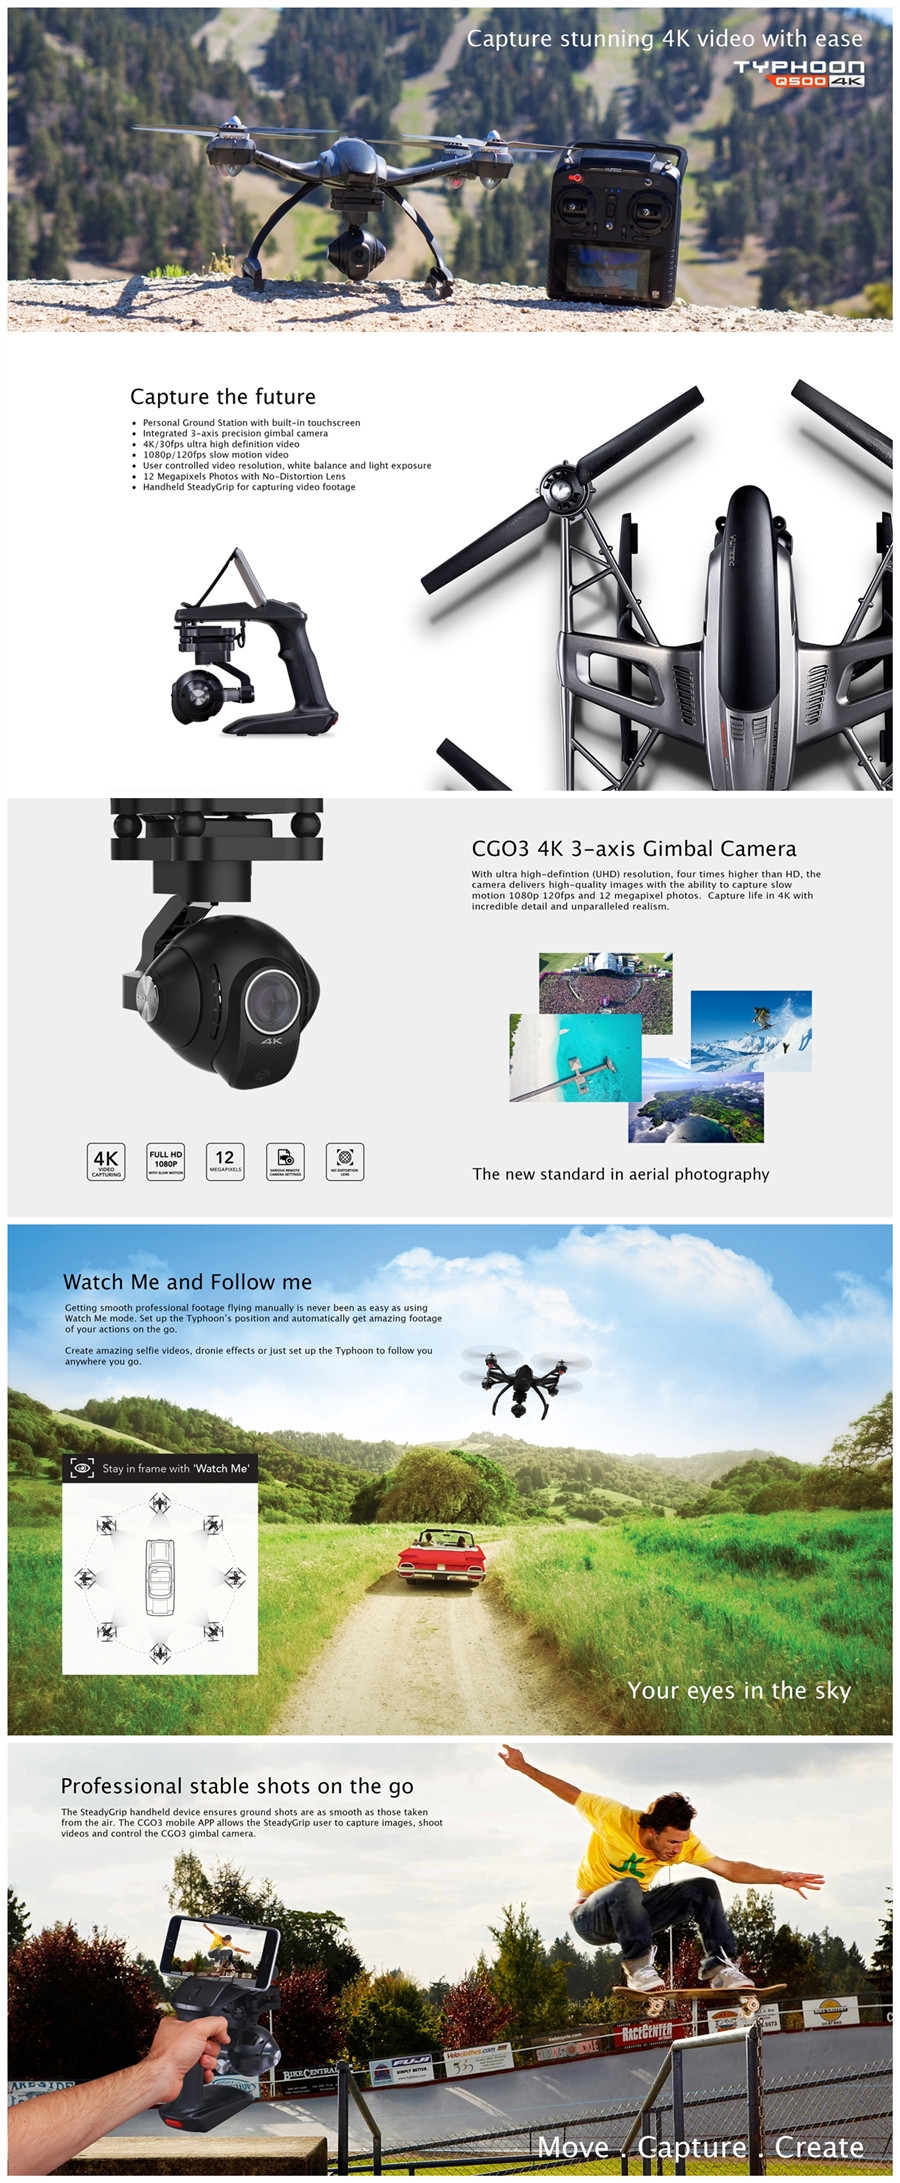 Yuneec Typhoon Q500 5.8G FPV With 4K HD Camera CGO3 3-Axis Gimbal RC Quadcopter RTF